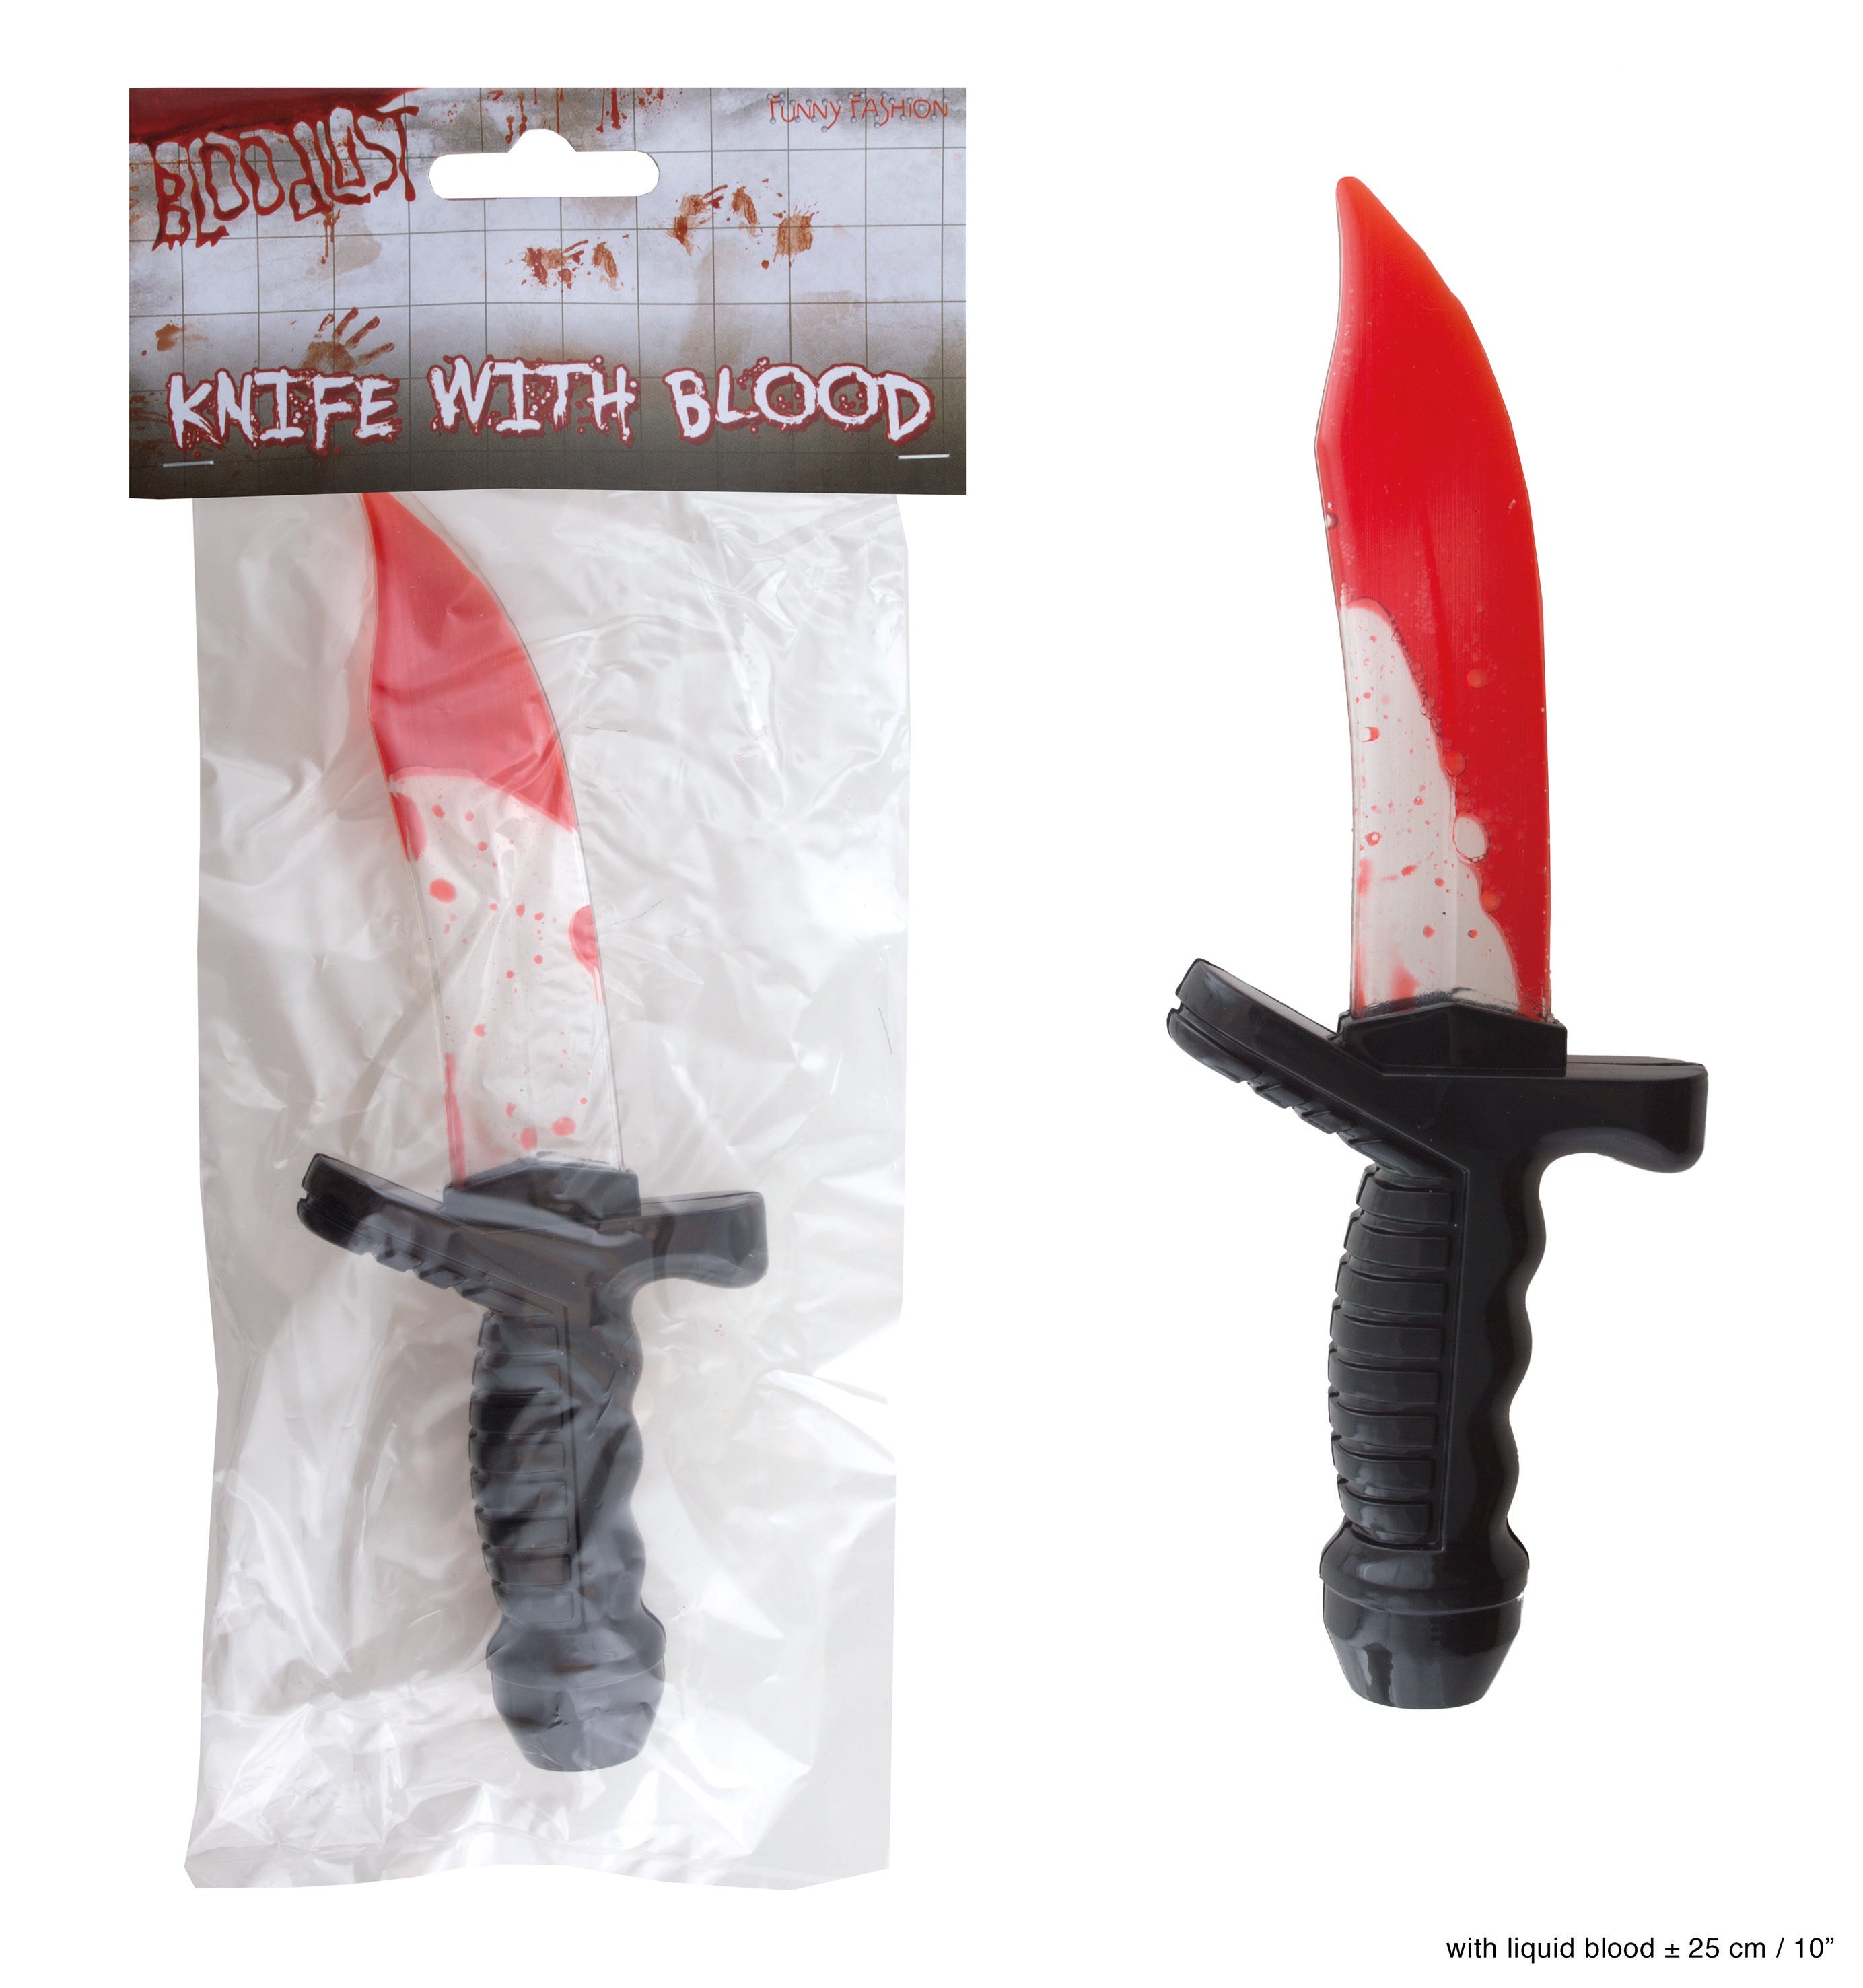 Knife Filled With Liquid Blood